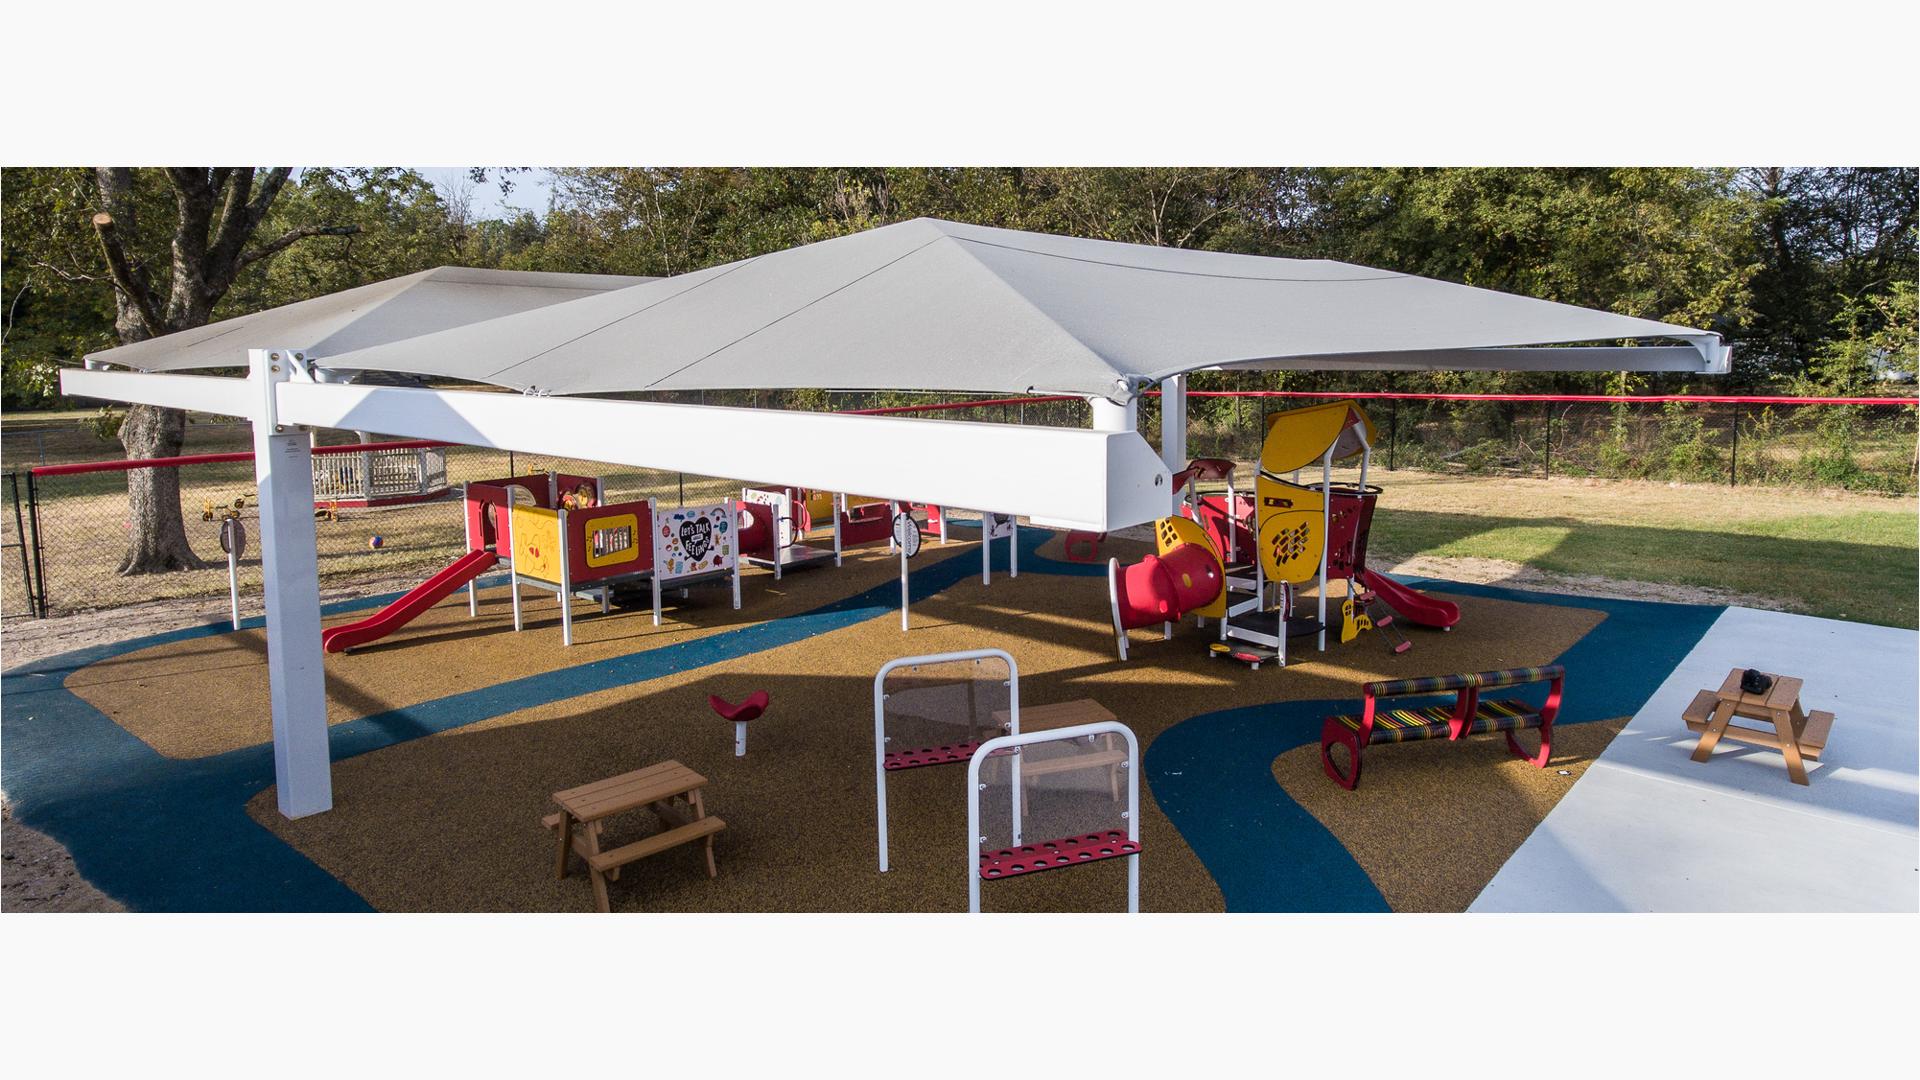 As part of Pooh Bear Daycare Center, this smart play playground sits under a shade canopy as the sun sets.